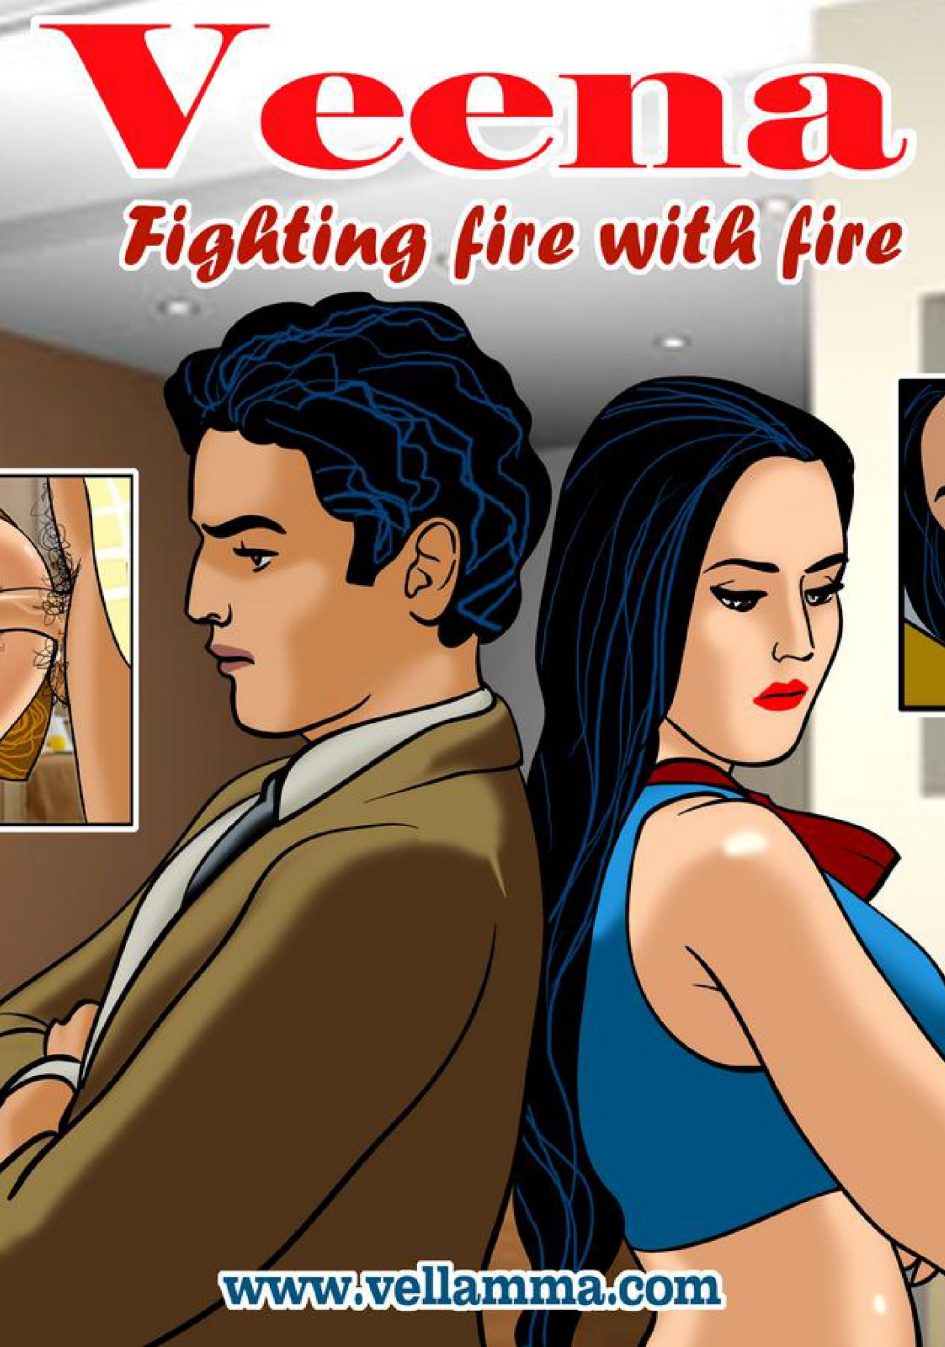 Veena Episode 07 English – Fighting Fire with Fire - 35 - FSIComics